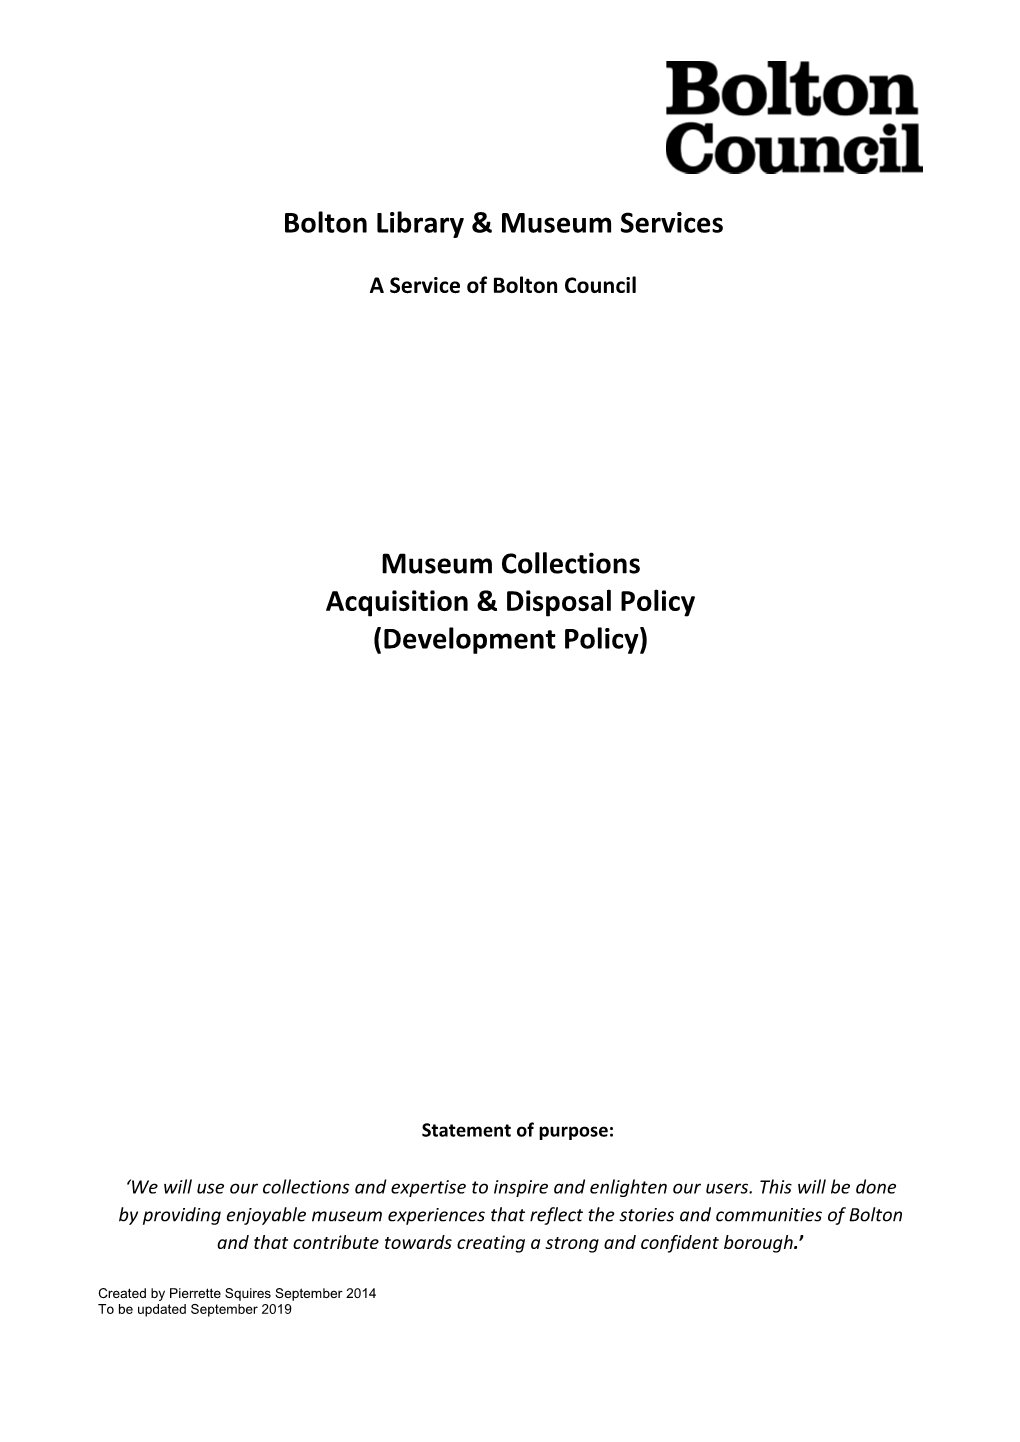 Museum Collections Acquisition & Disposal Policy